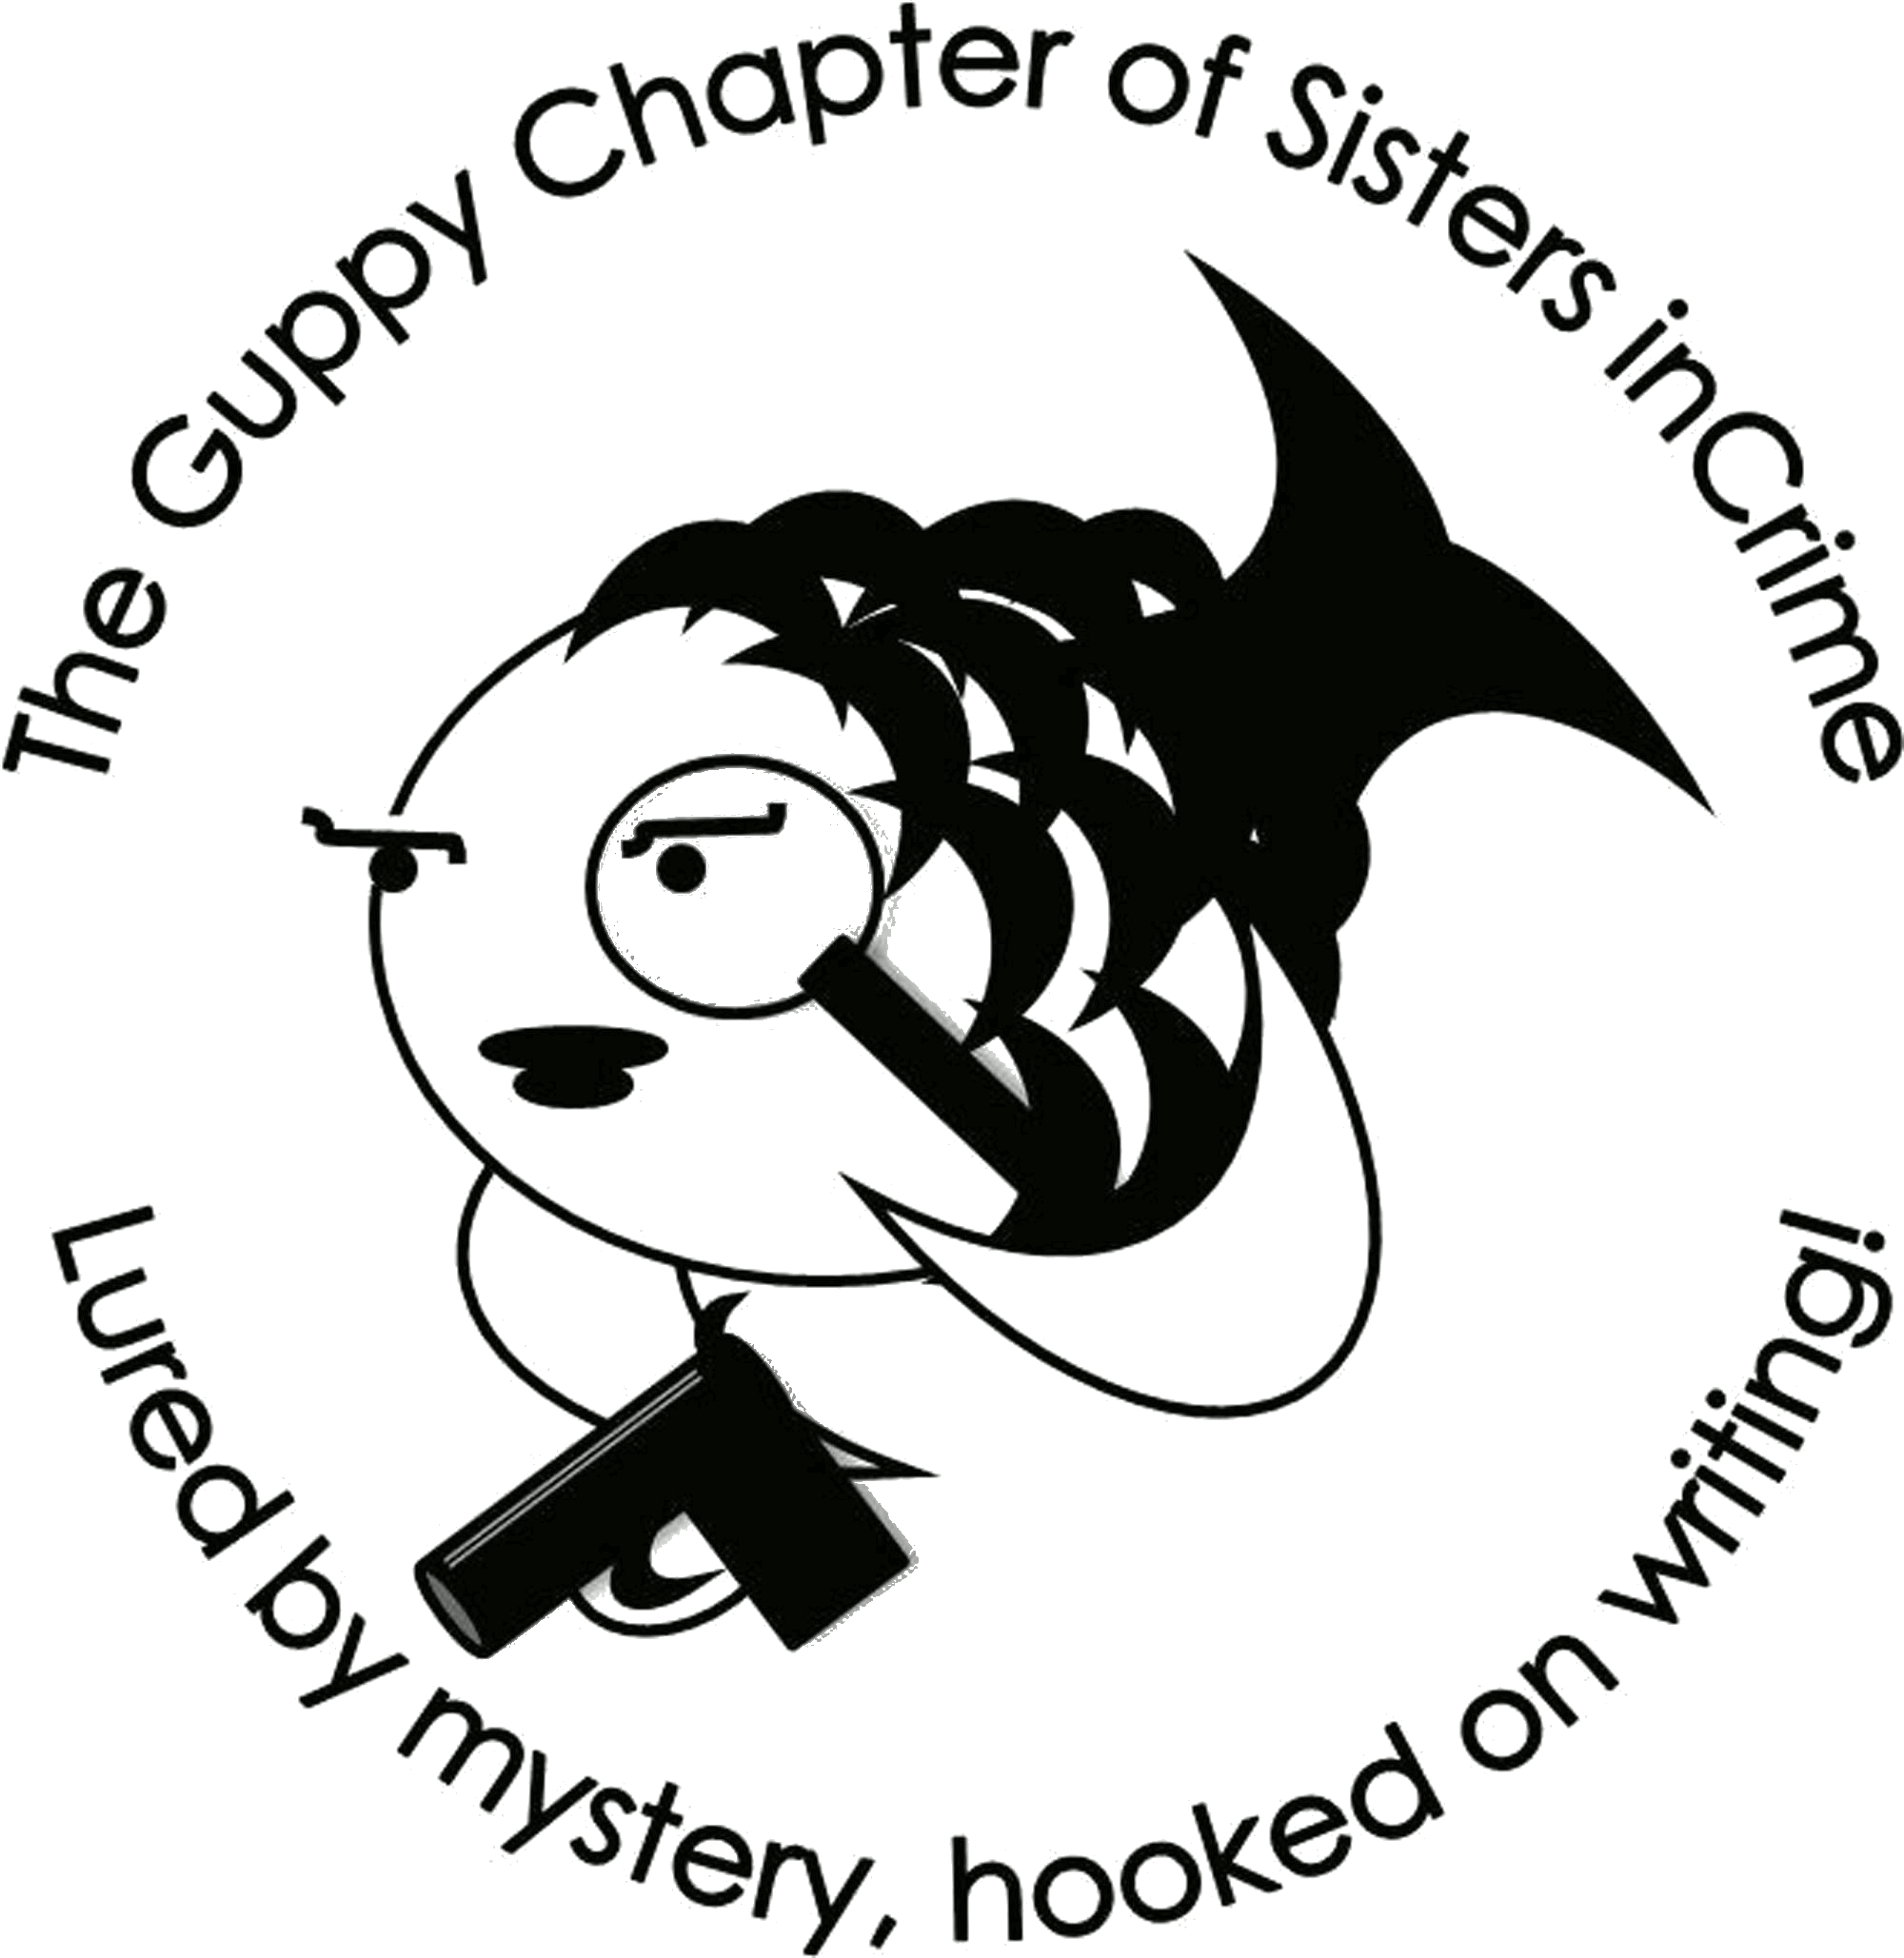 The Guppy Chapter of Sisters in Crime